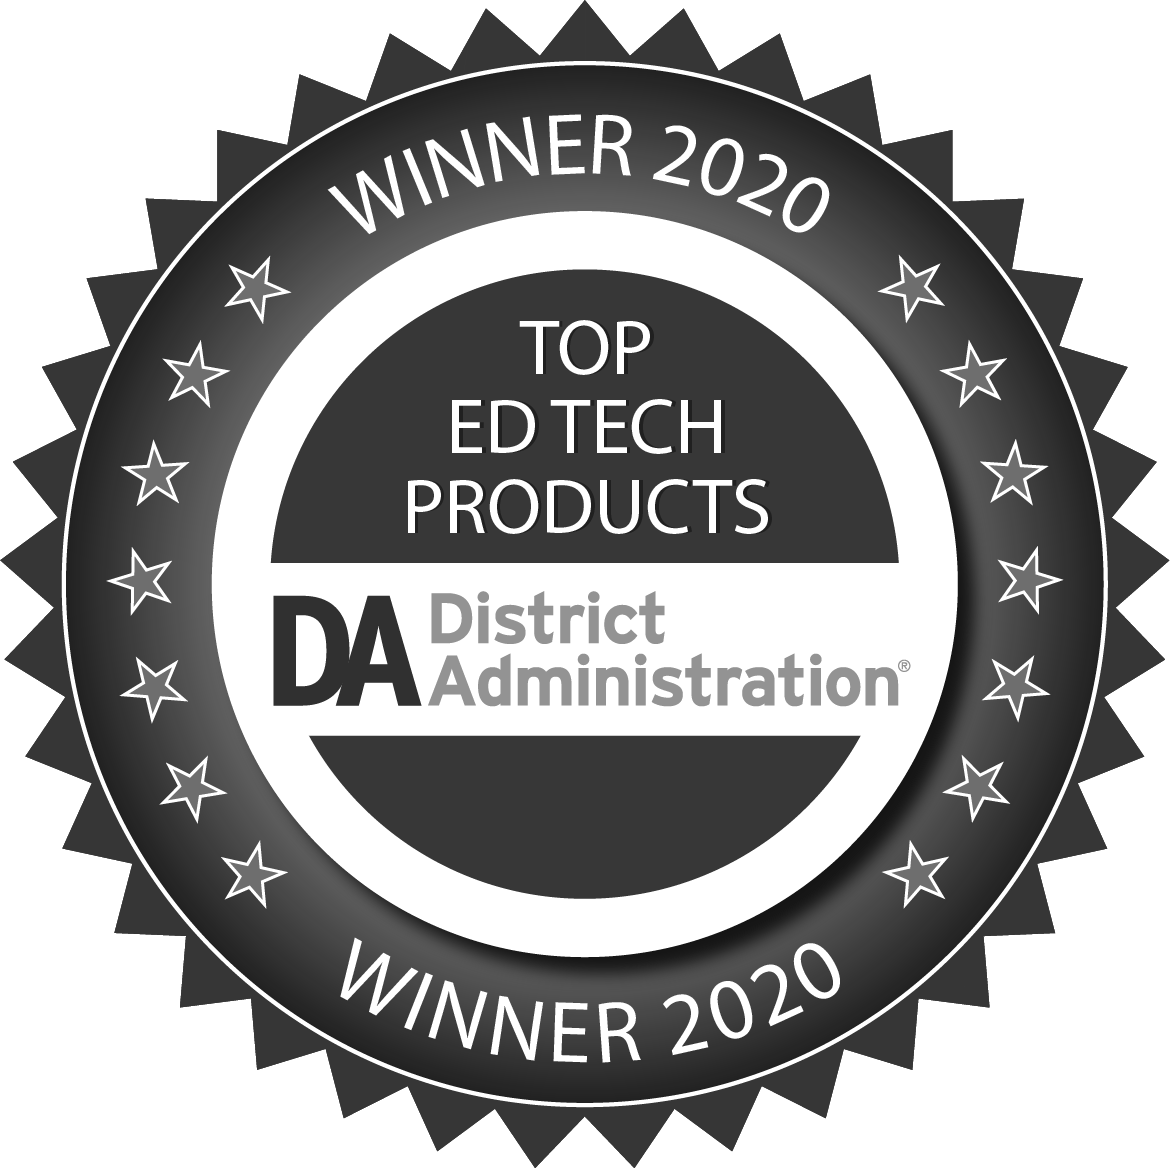 District Administration Top Ed Tech Products - Winner 2020